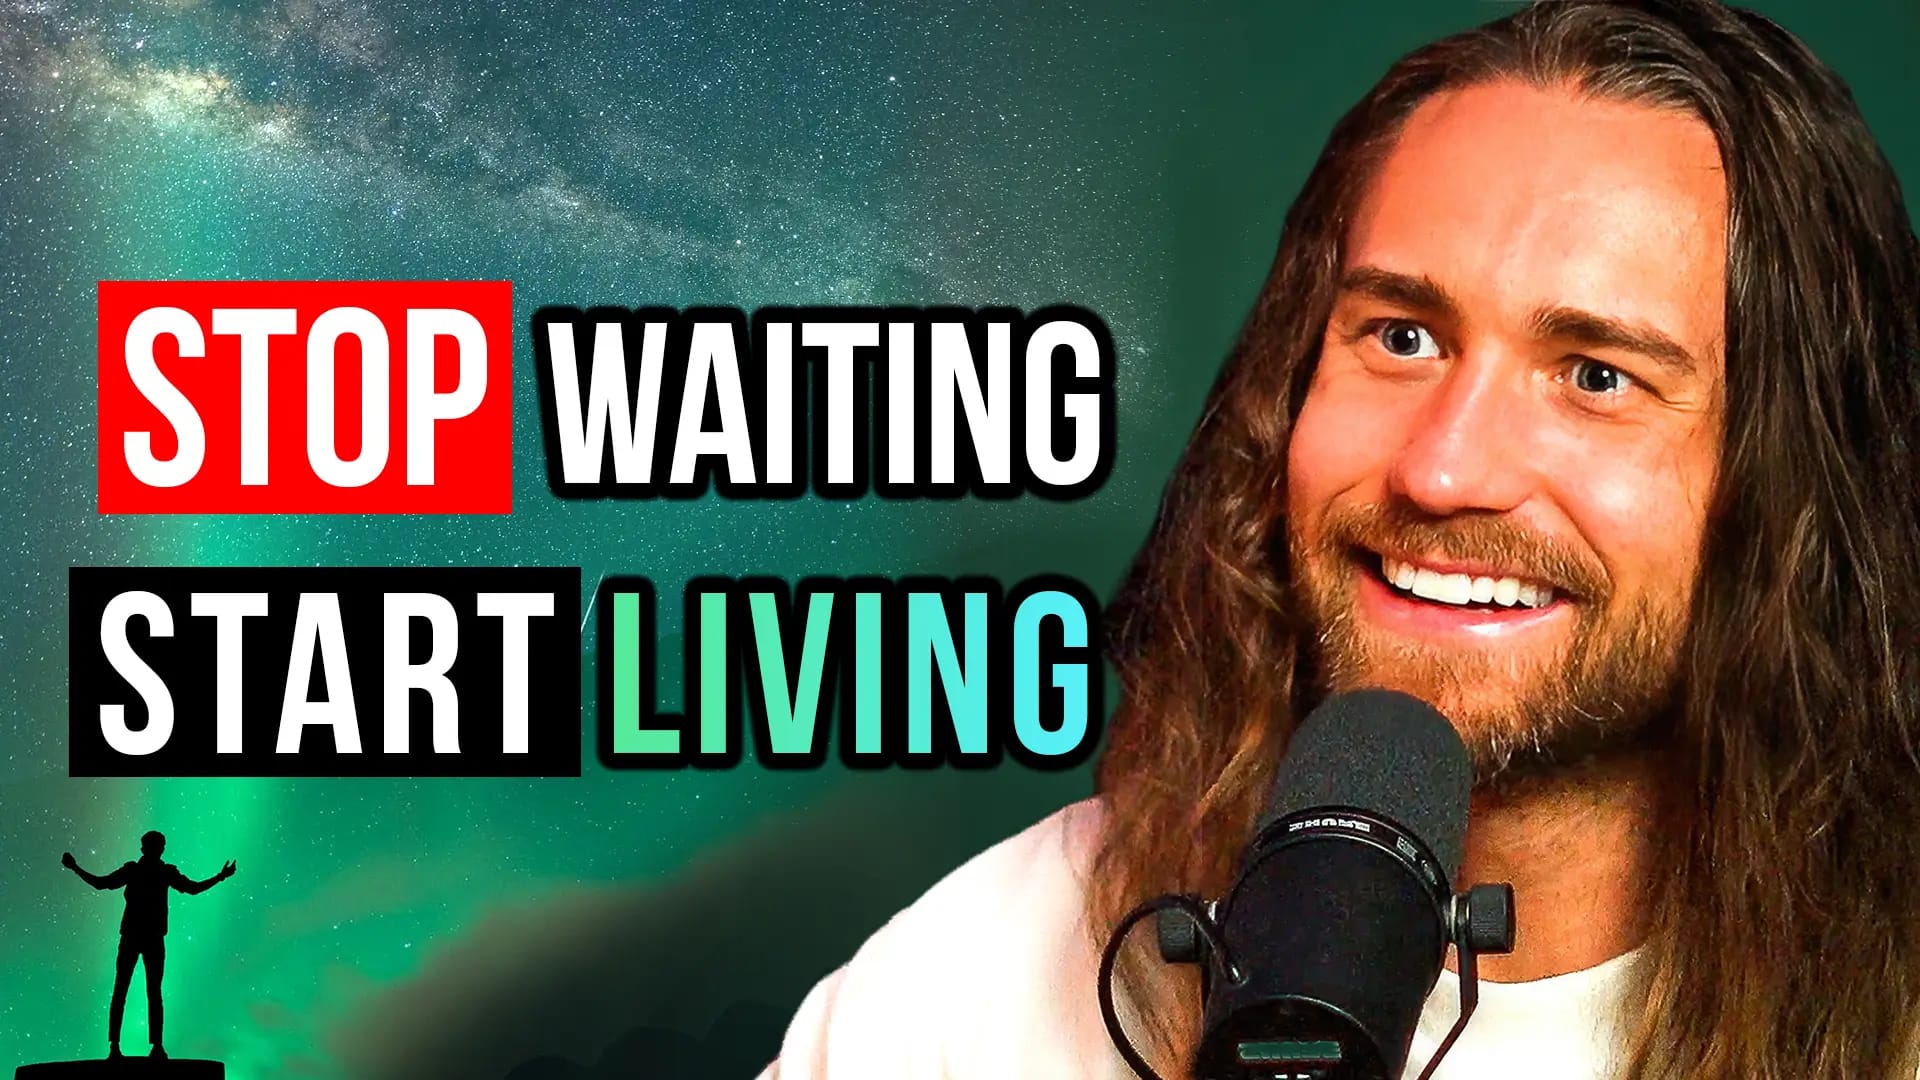 Aaron Doughty | Stop Waiting, Just START: Down To Earth Spirituality (How To Get The Life You Want)